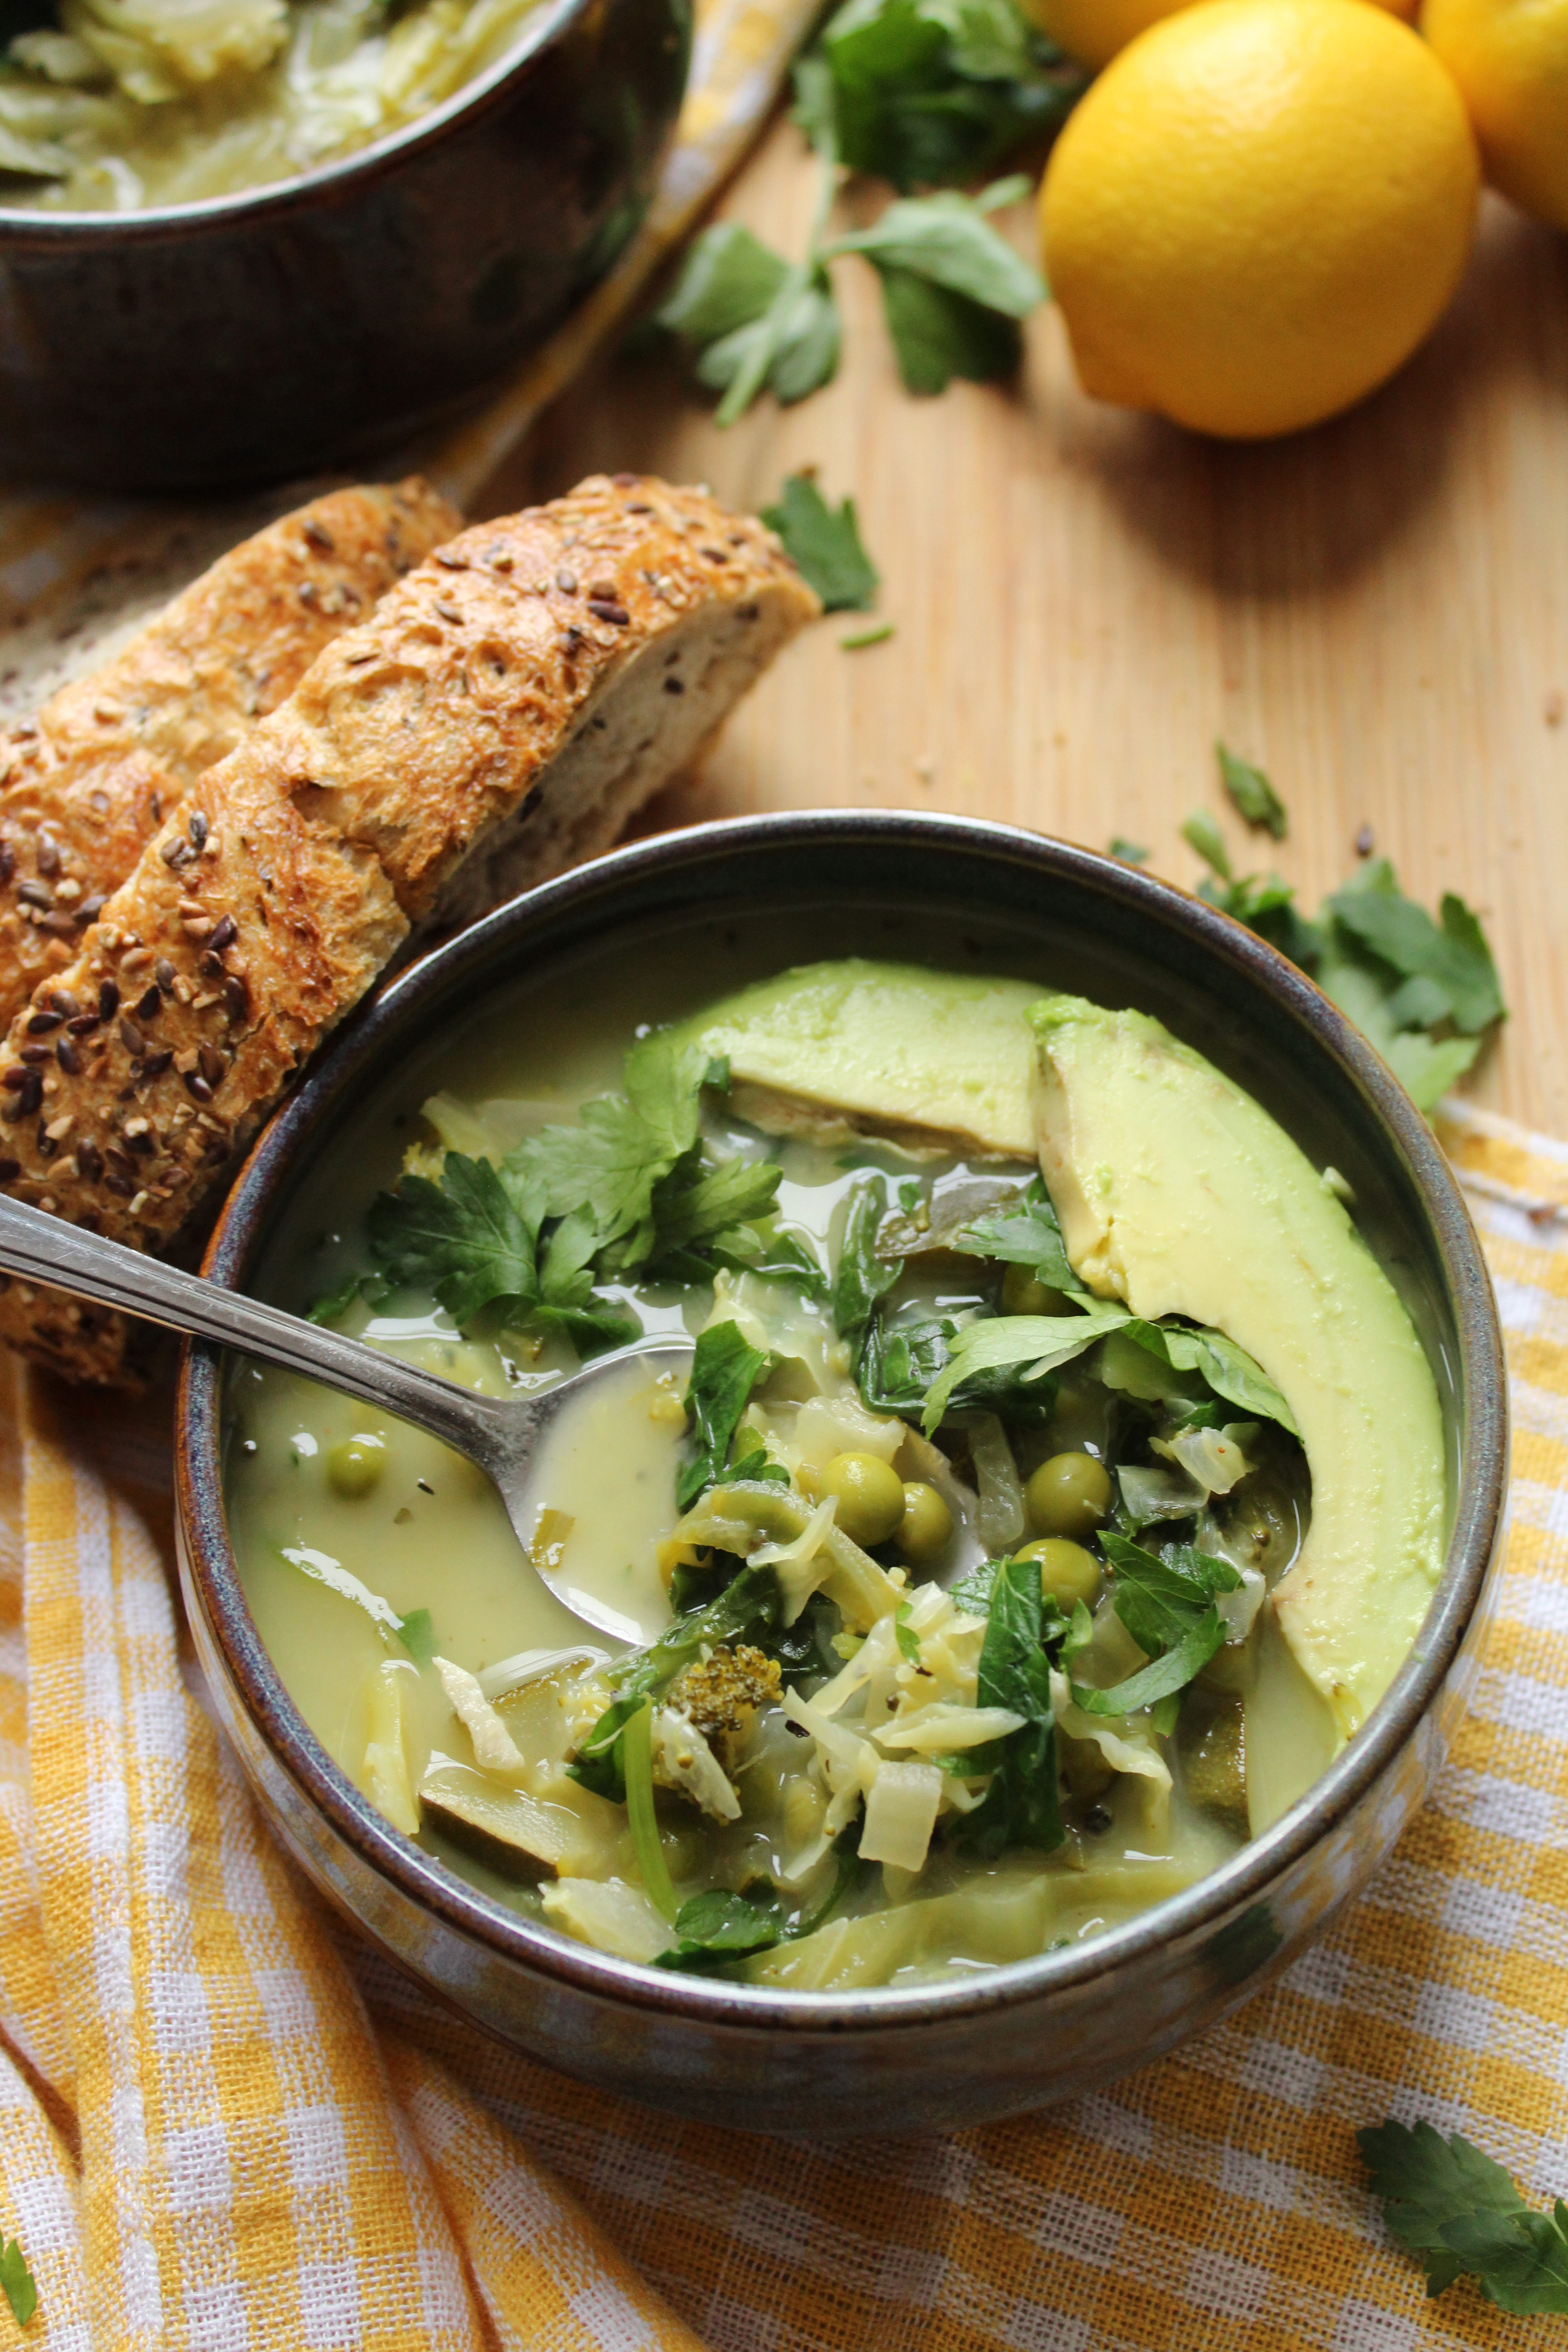 Green Cleansing Vegetable Soup that's vegan and gluten free. Great for detox!